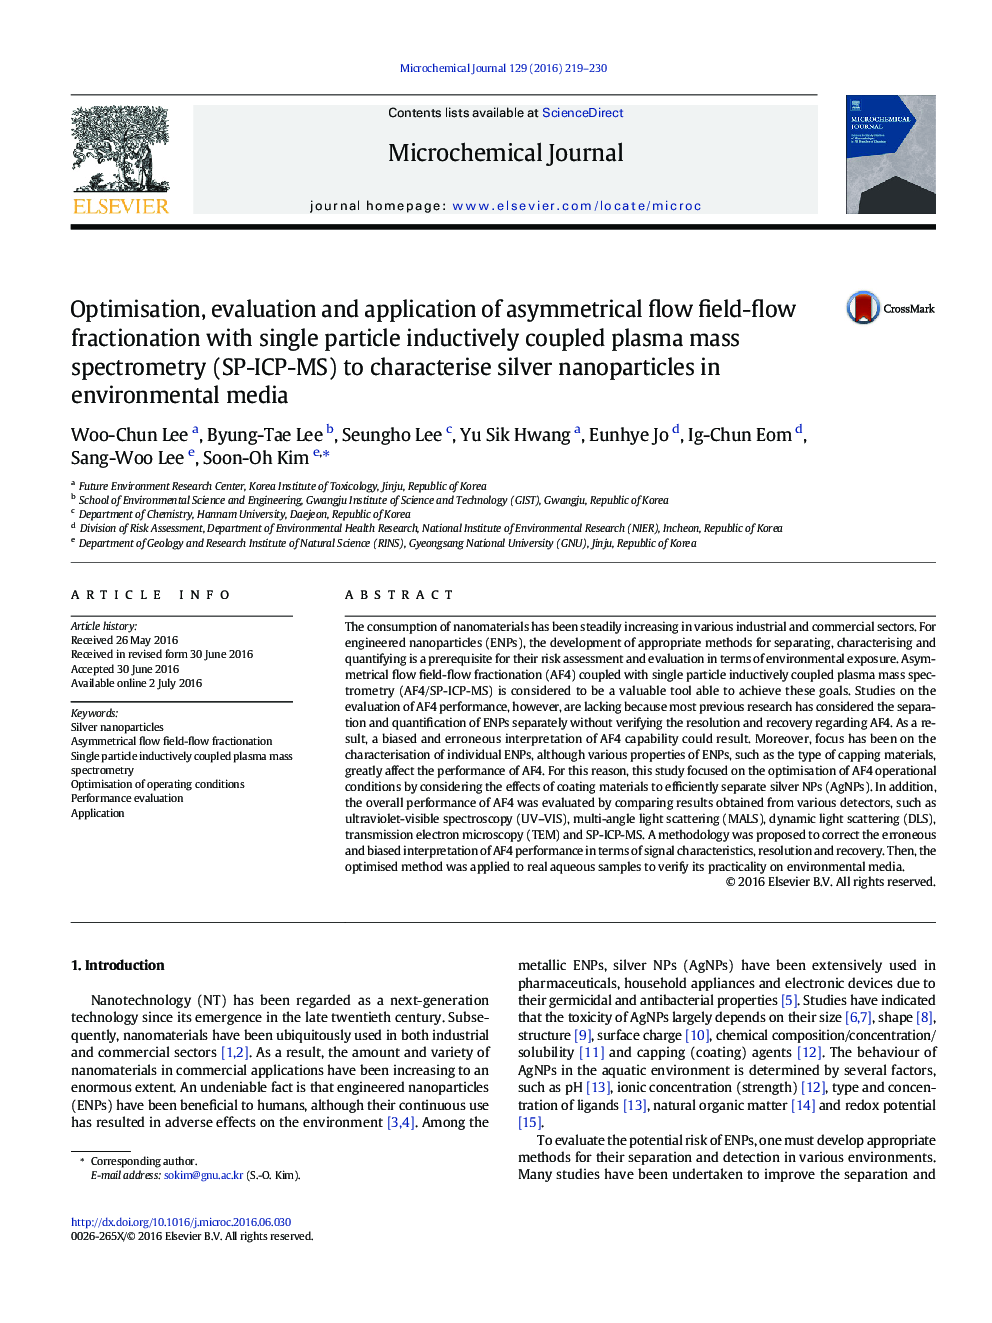 Optimisation, evaluation and application of asymmetrical flow field-flow fractionation with single particle inductively coupled plasma mass spectrometry (SP-ICP-MS) to characterise silver nanoparticles in environmental media